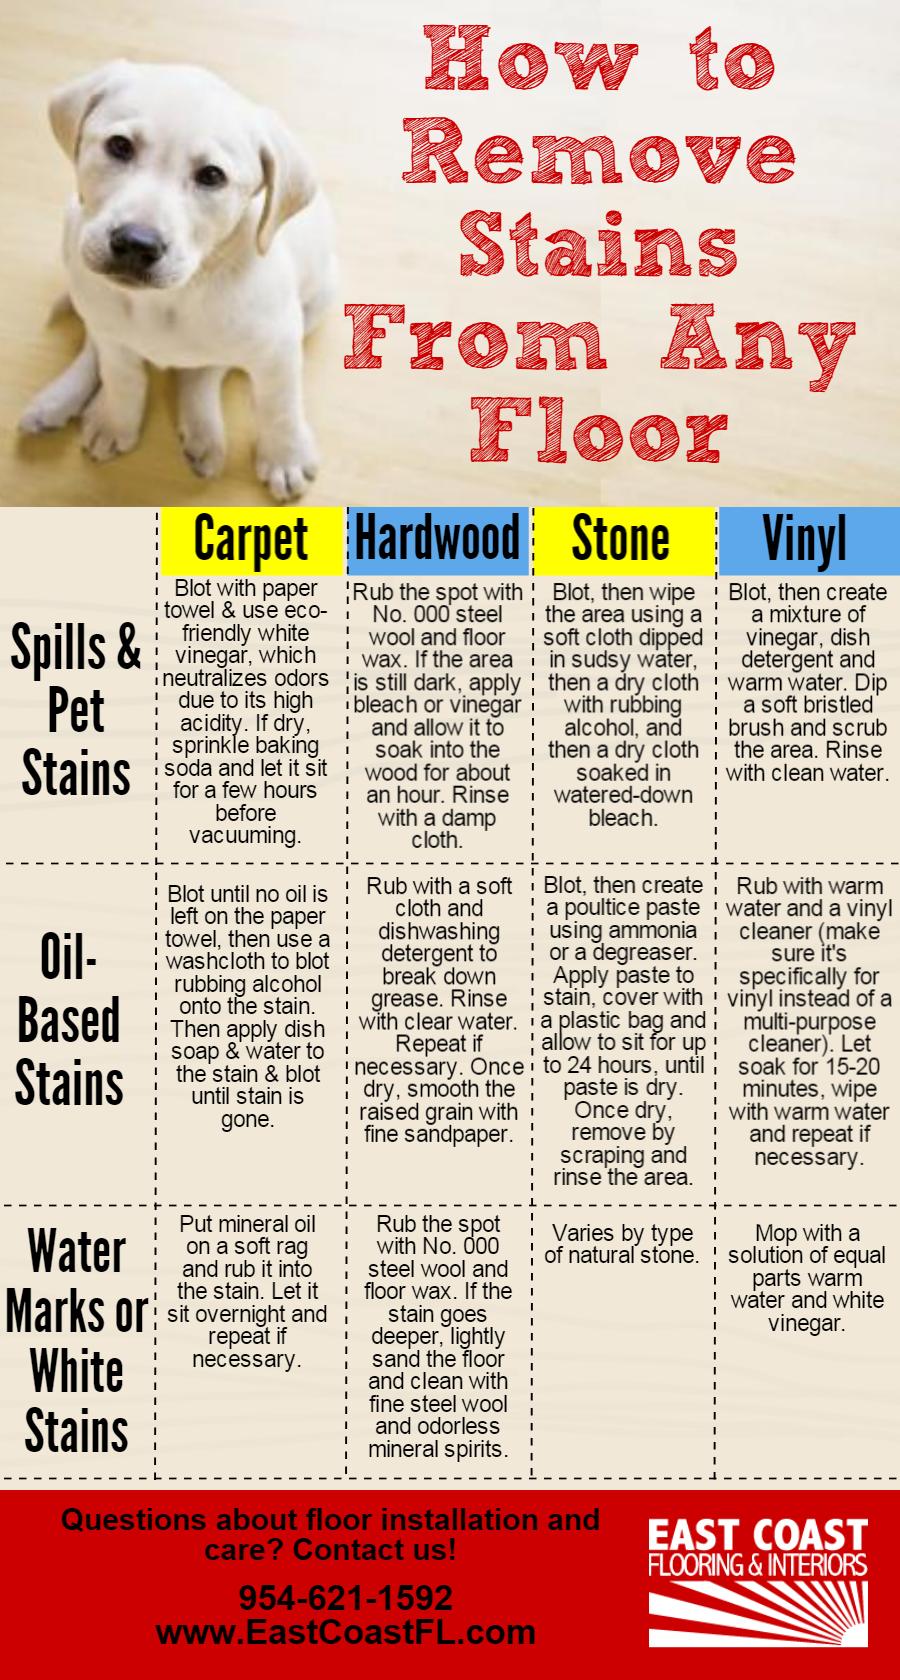 How to remove stains from carpet, vinyl, stone any hardwood flooring infographic